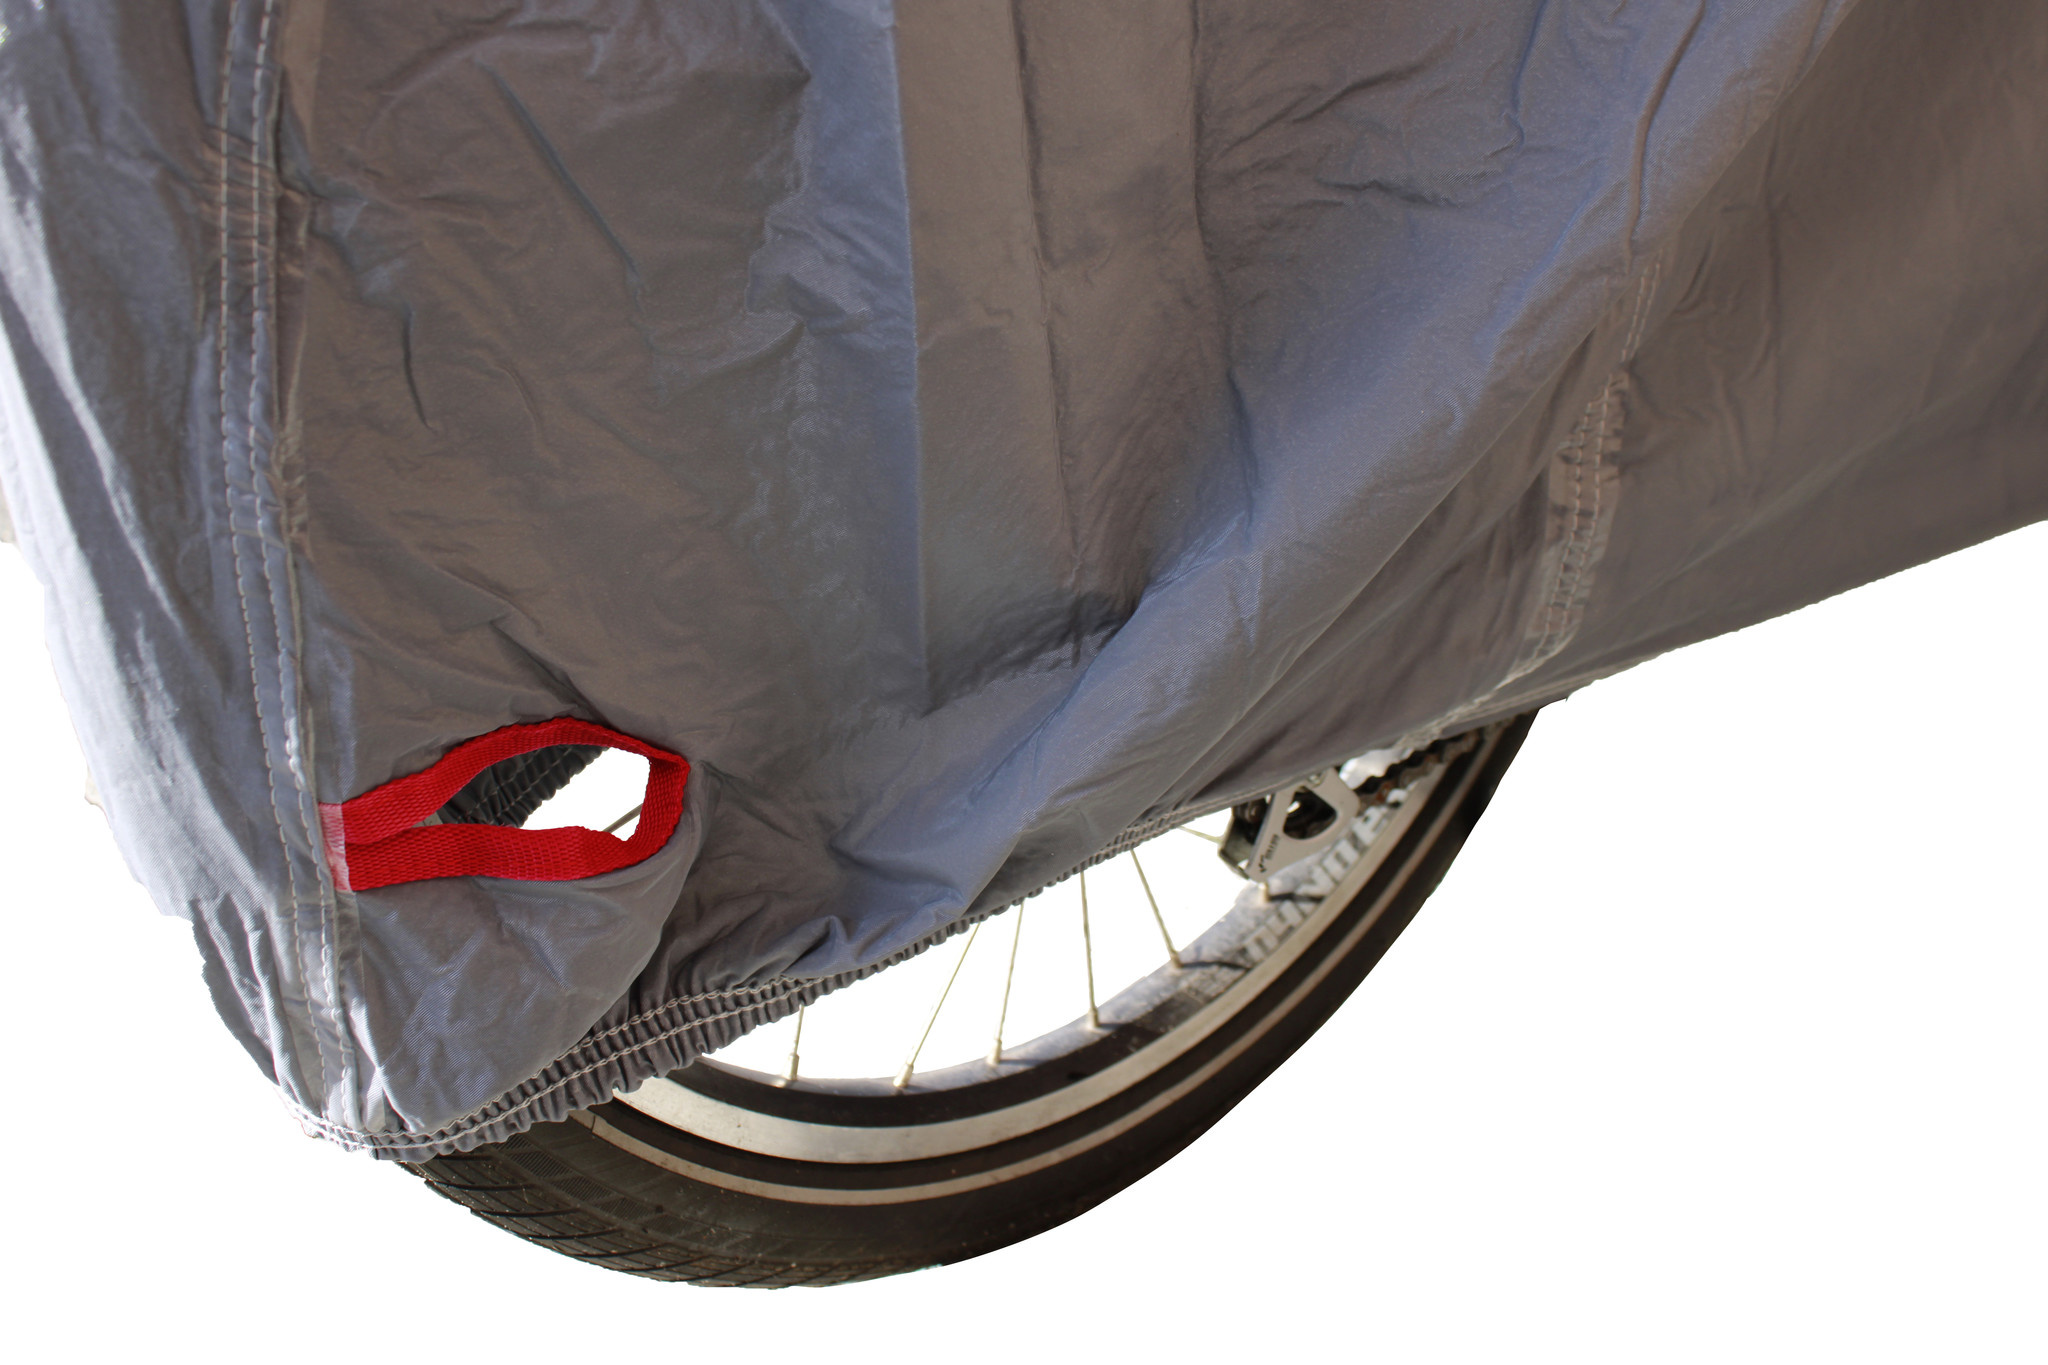 DS Covers Bache protection pour velo cargo bike 3 roues